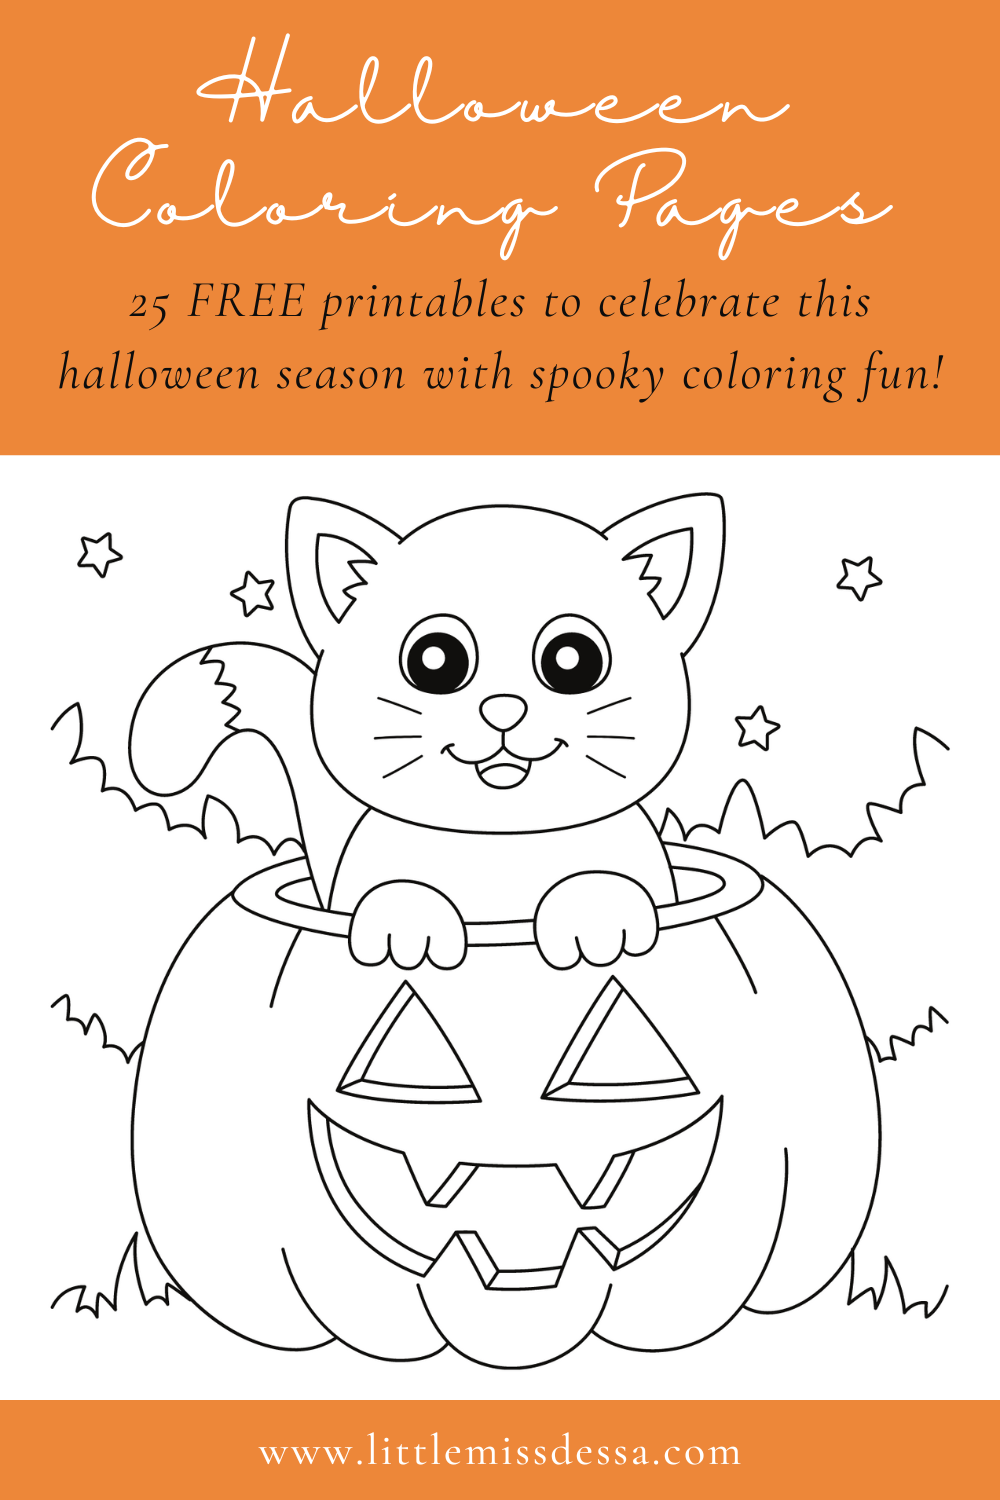 Halloween Fun: 25 Coloring Pages for your littles! - LITTLEMISSDESSA